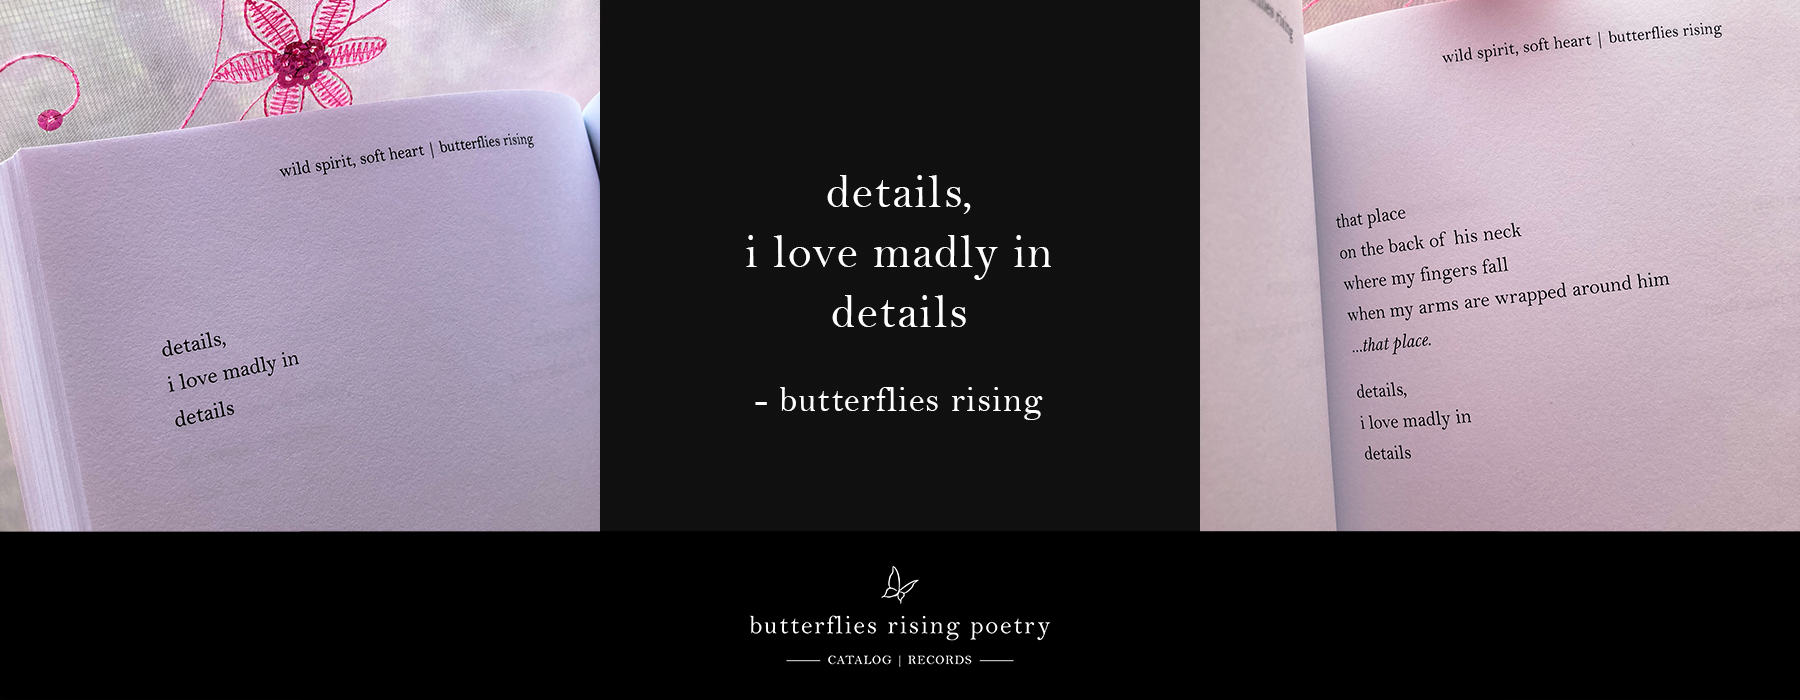 details, i love madly in details' - butterflies rising poem series